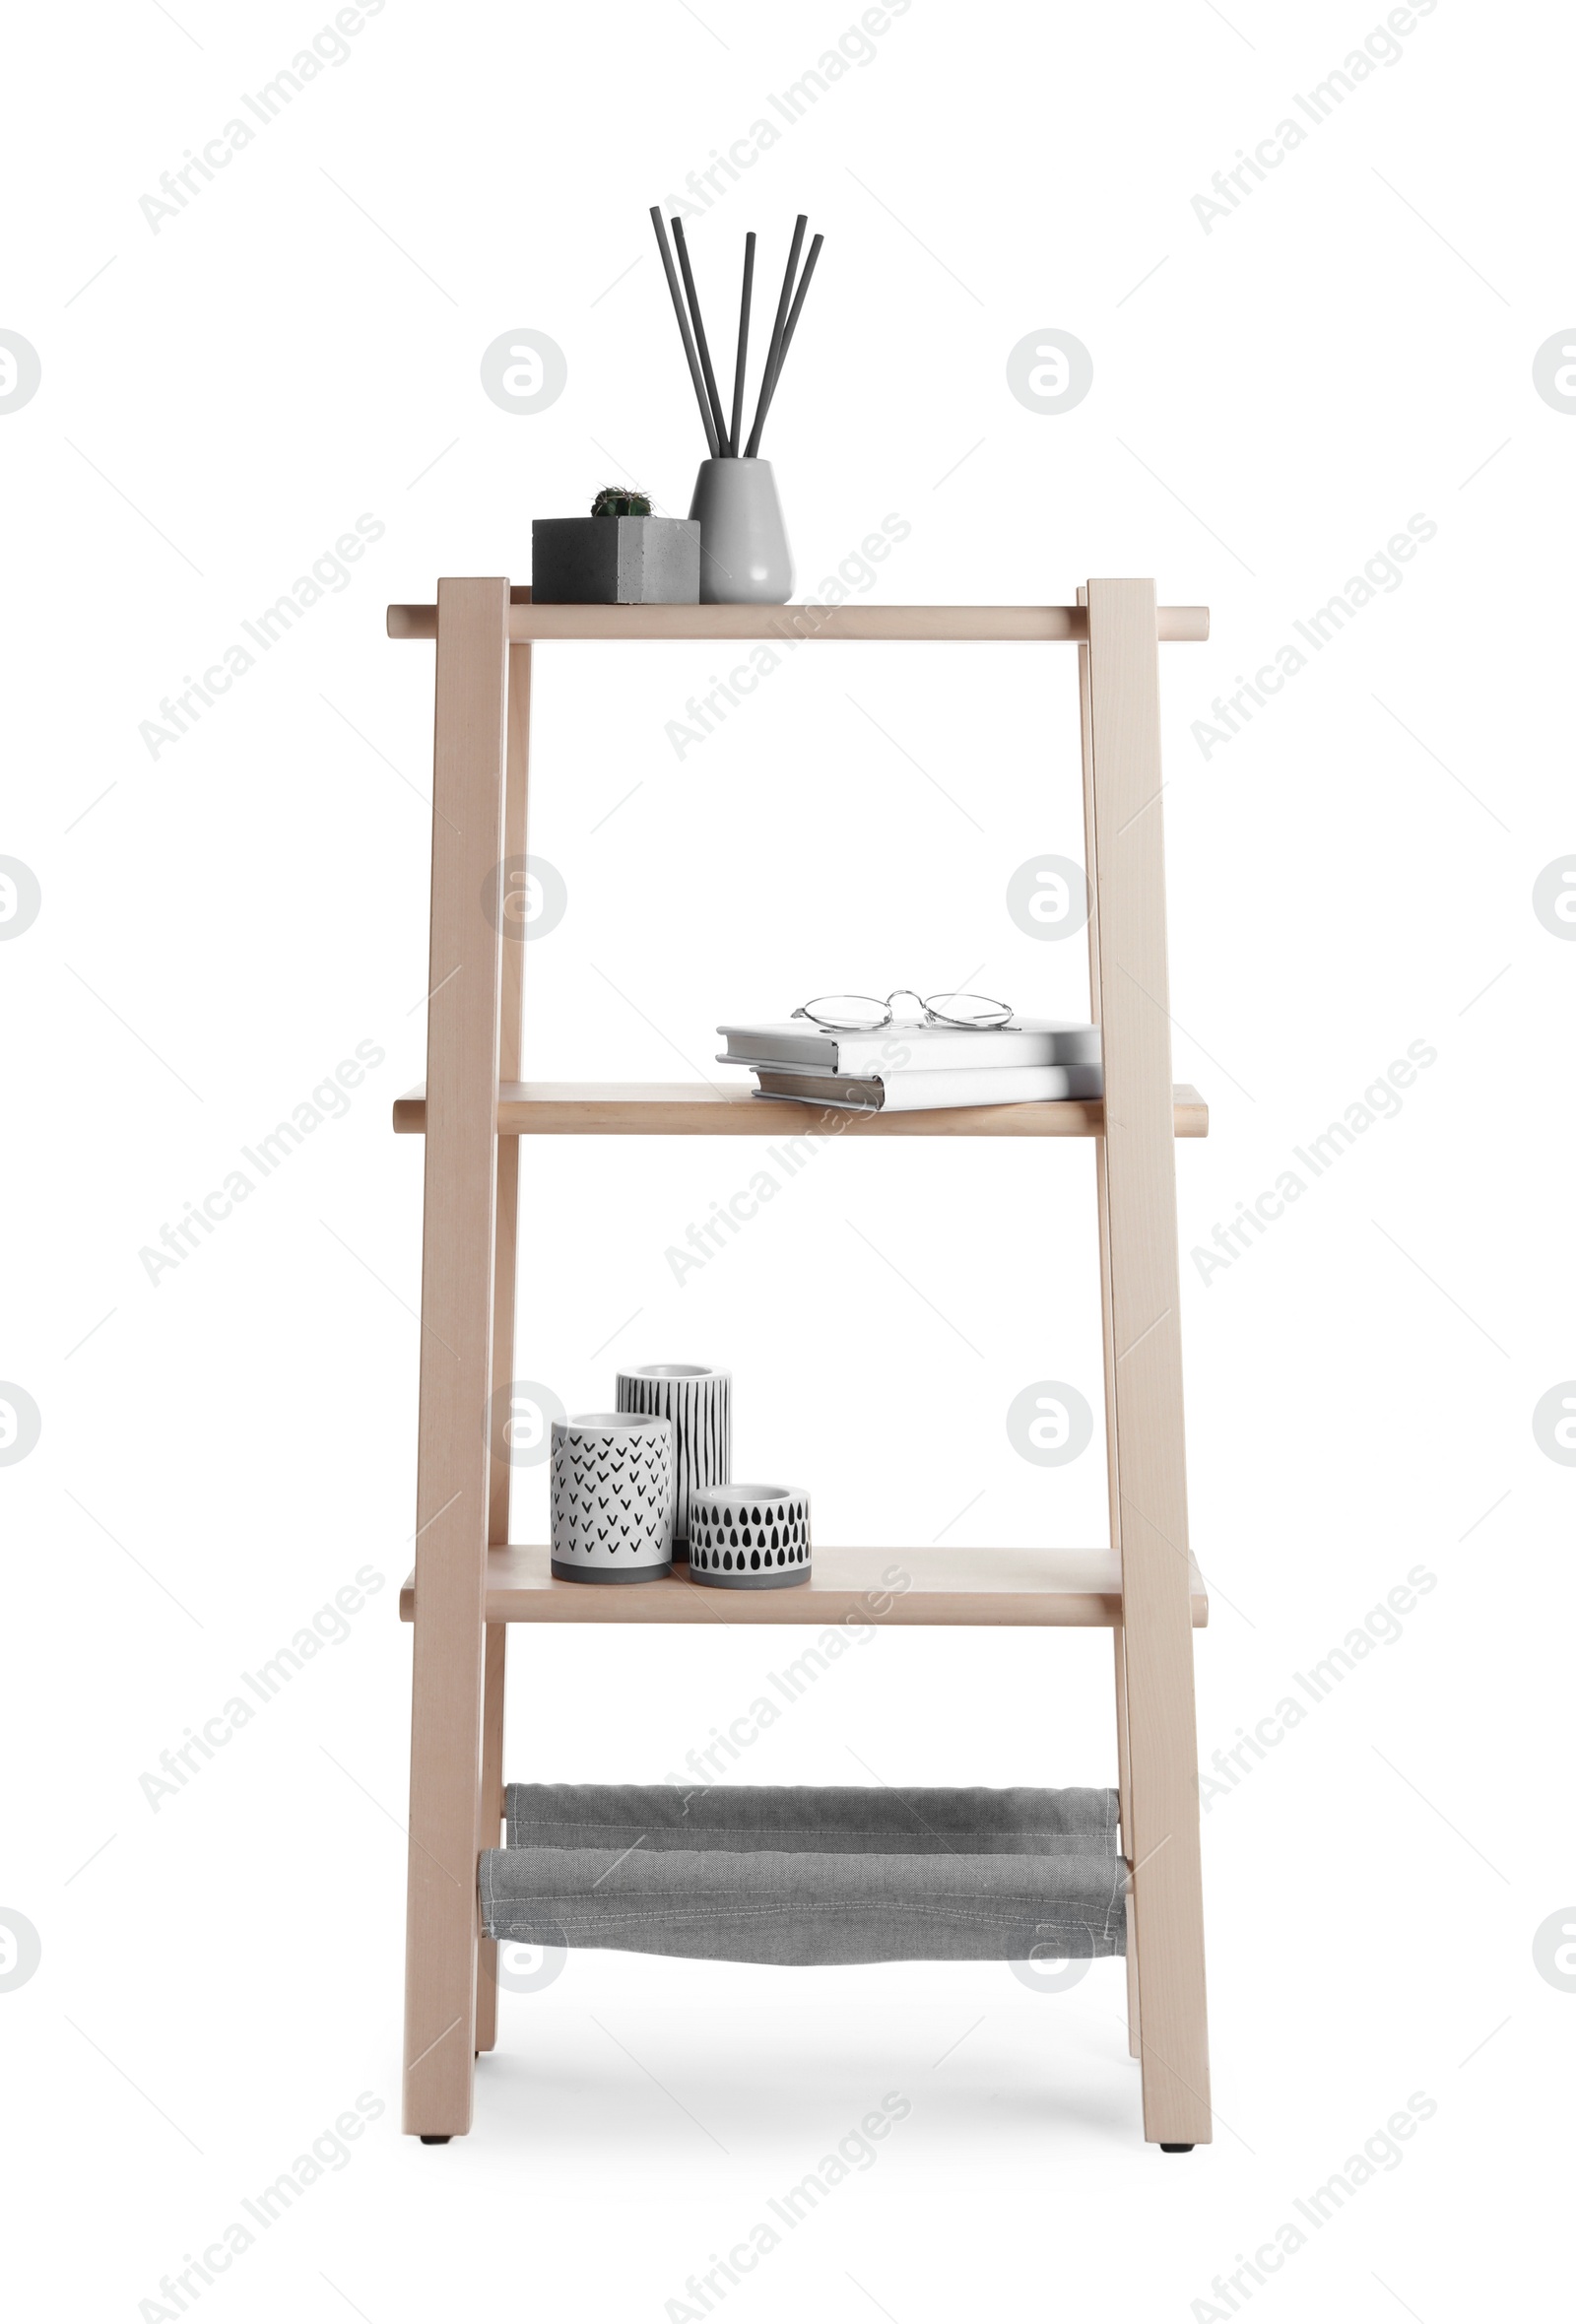 Photo of Wooden shelving unit with different items isolated on white